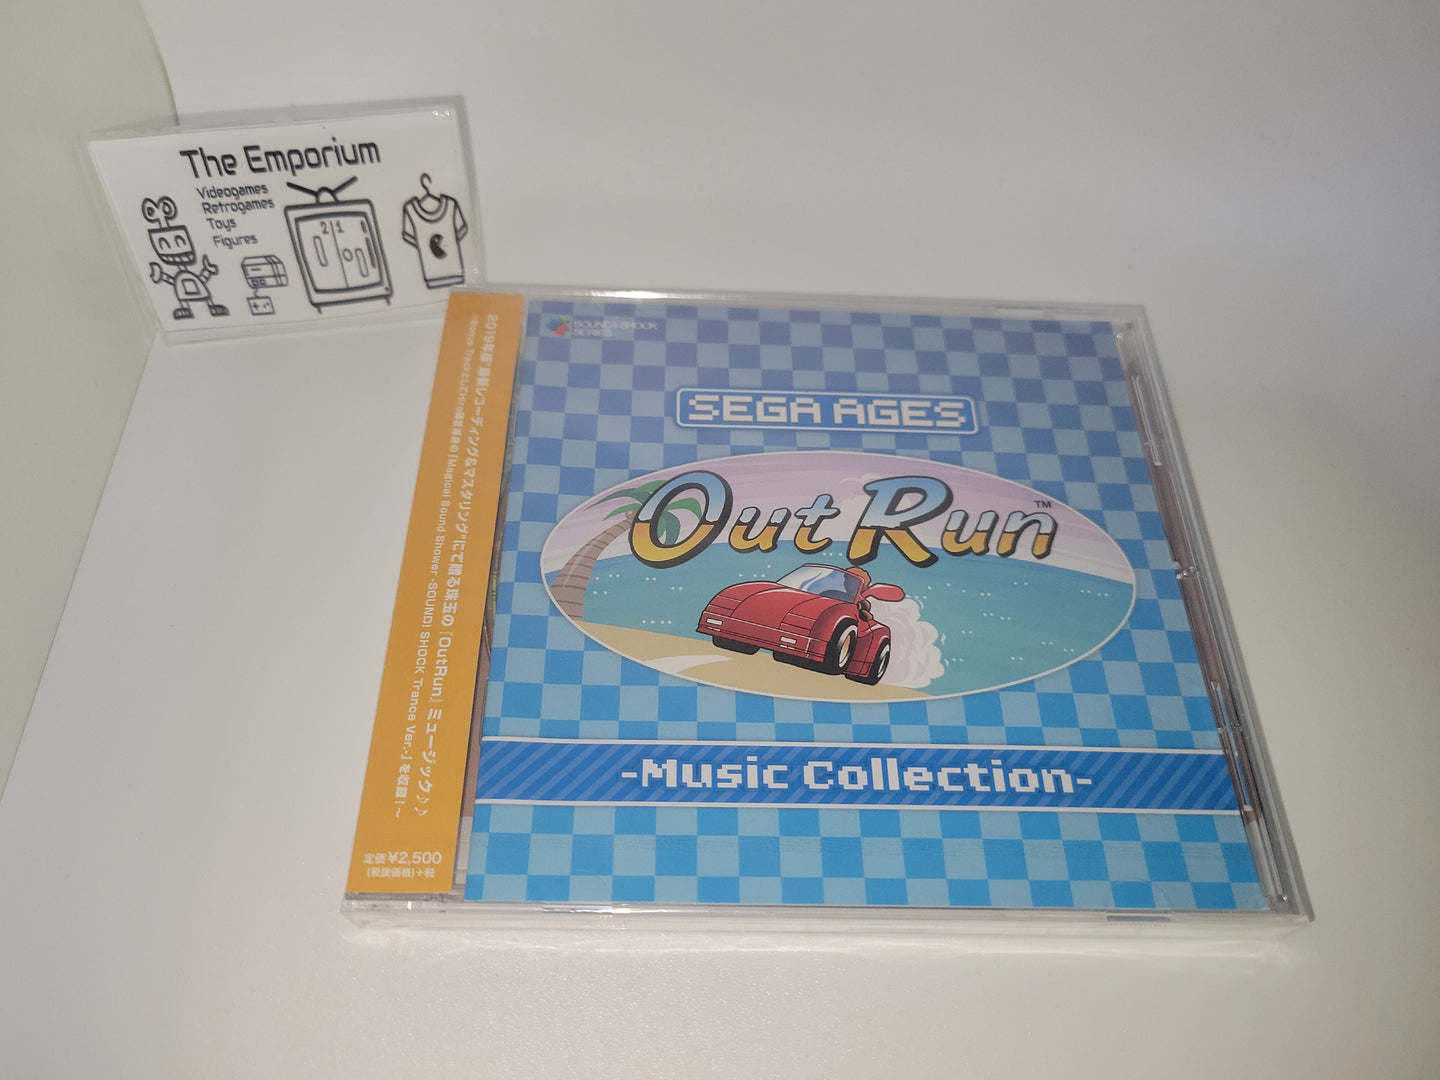 Sega Ages OutRun - Music Collection - Music cd soundtrack